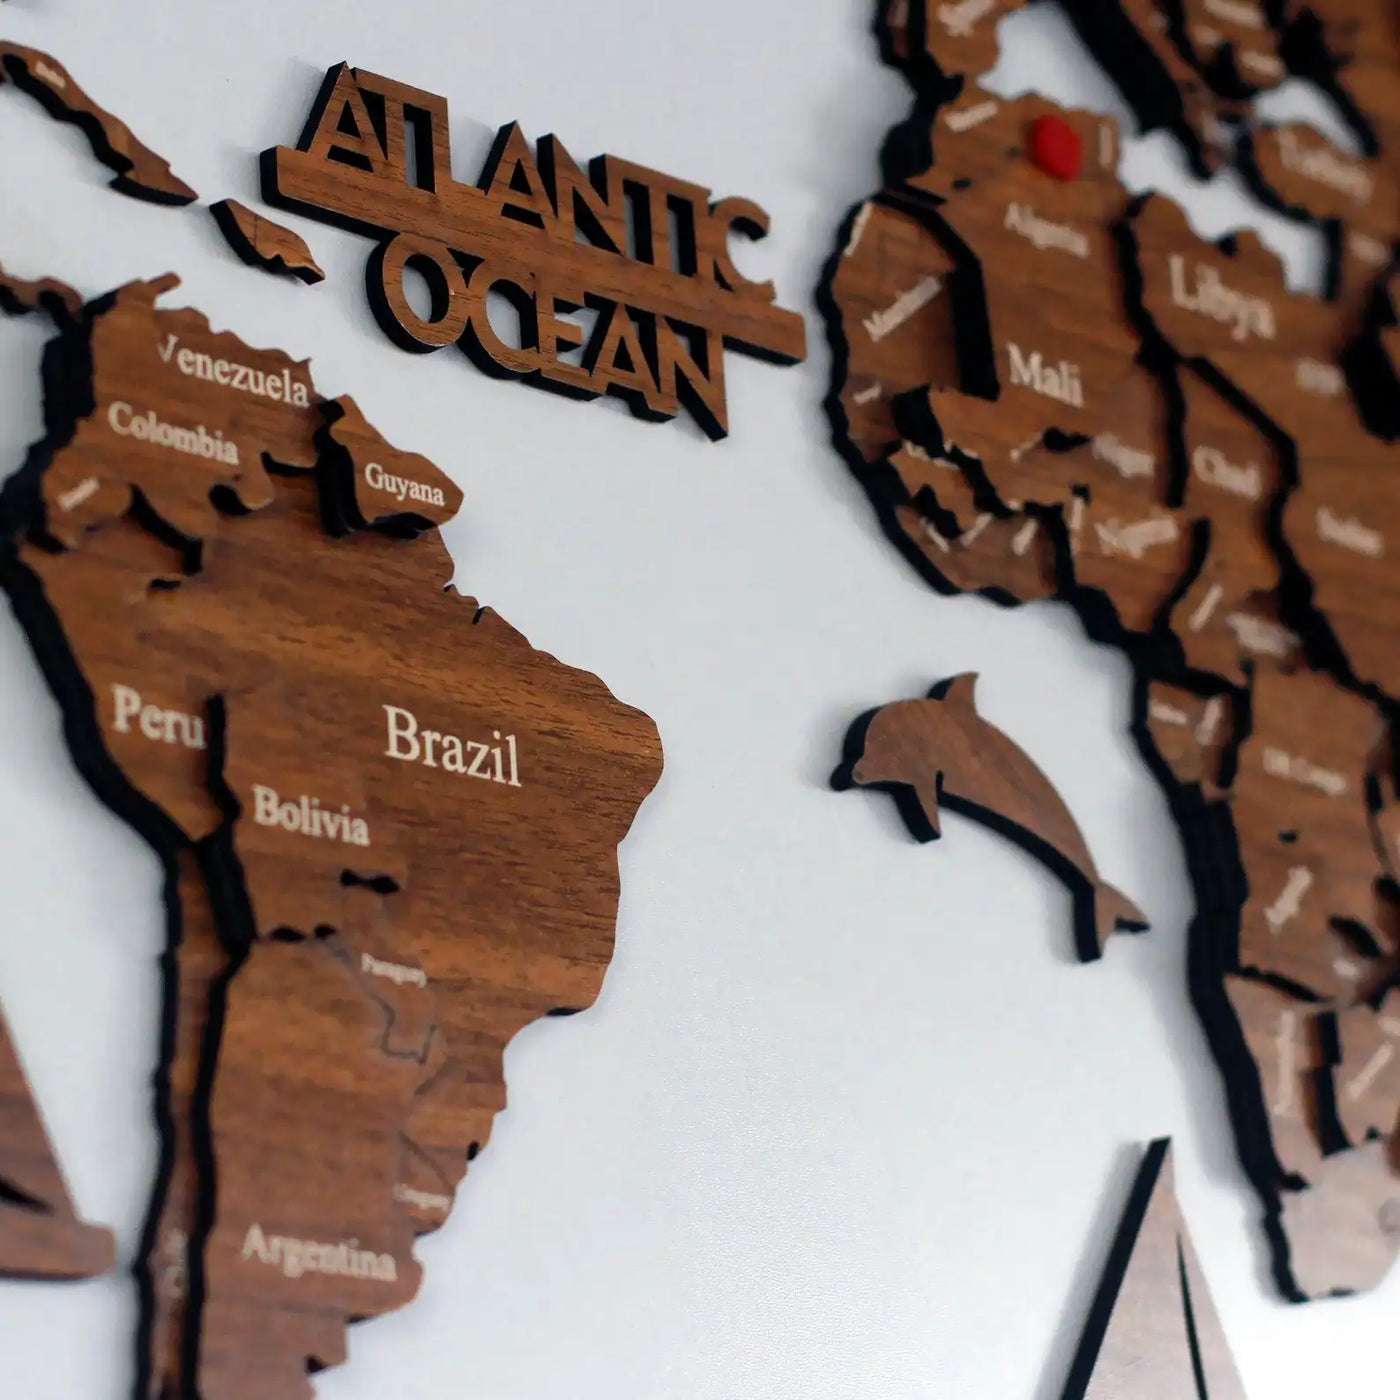 3D Wooden World Map Pure Wood